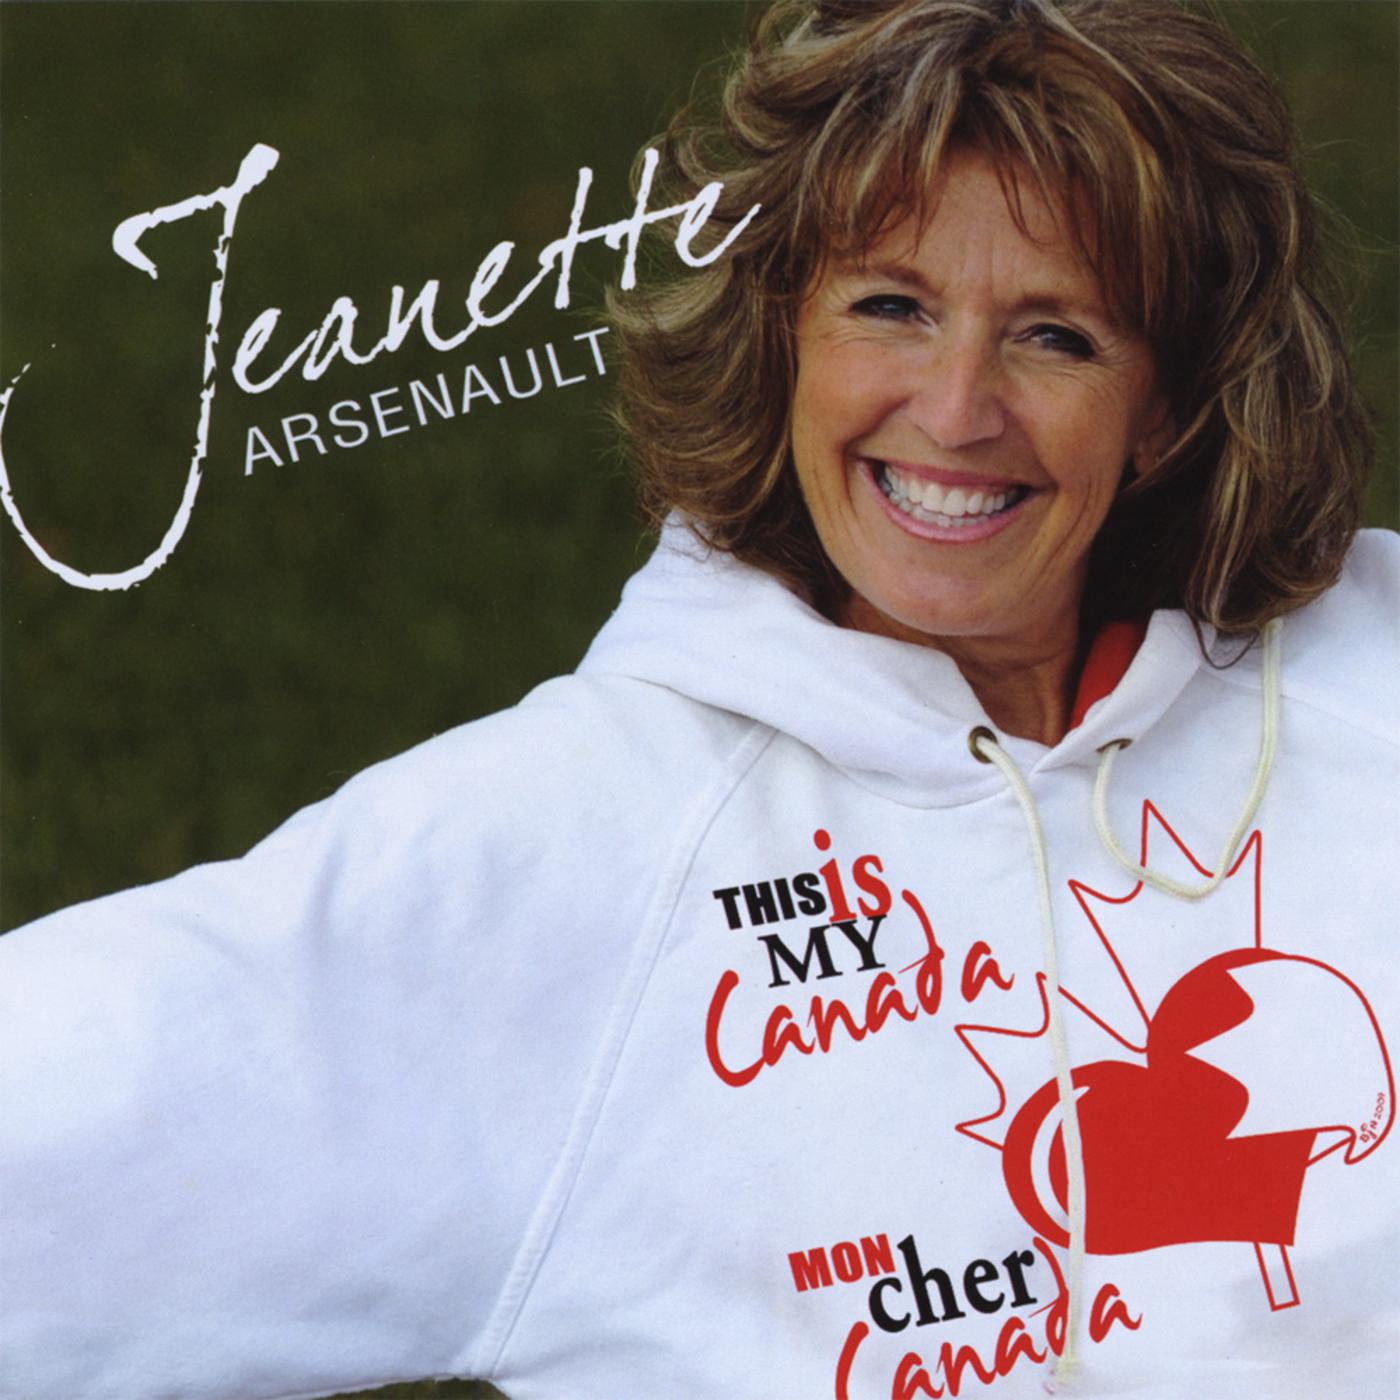 Jeanette Arsenault - I Love Canada (It's Winter That I Hate)